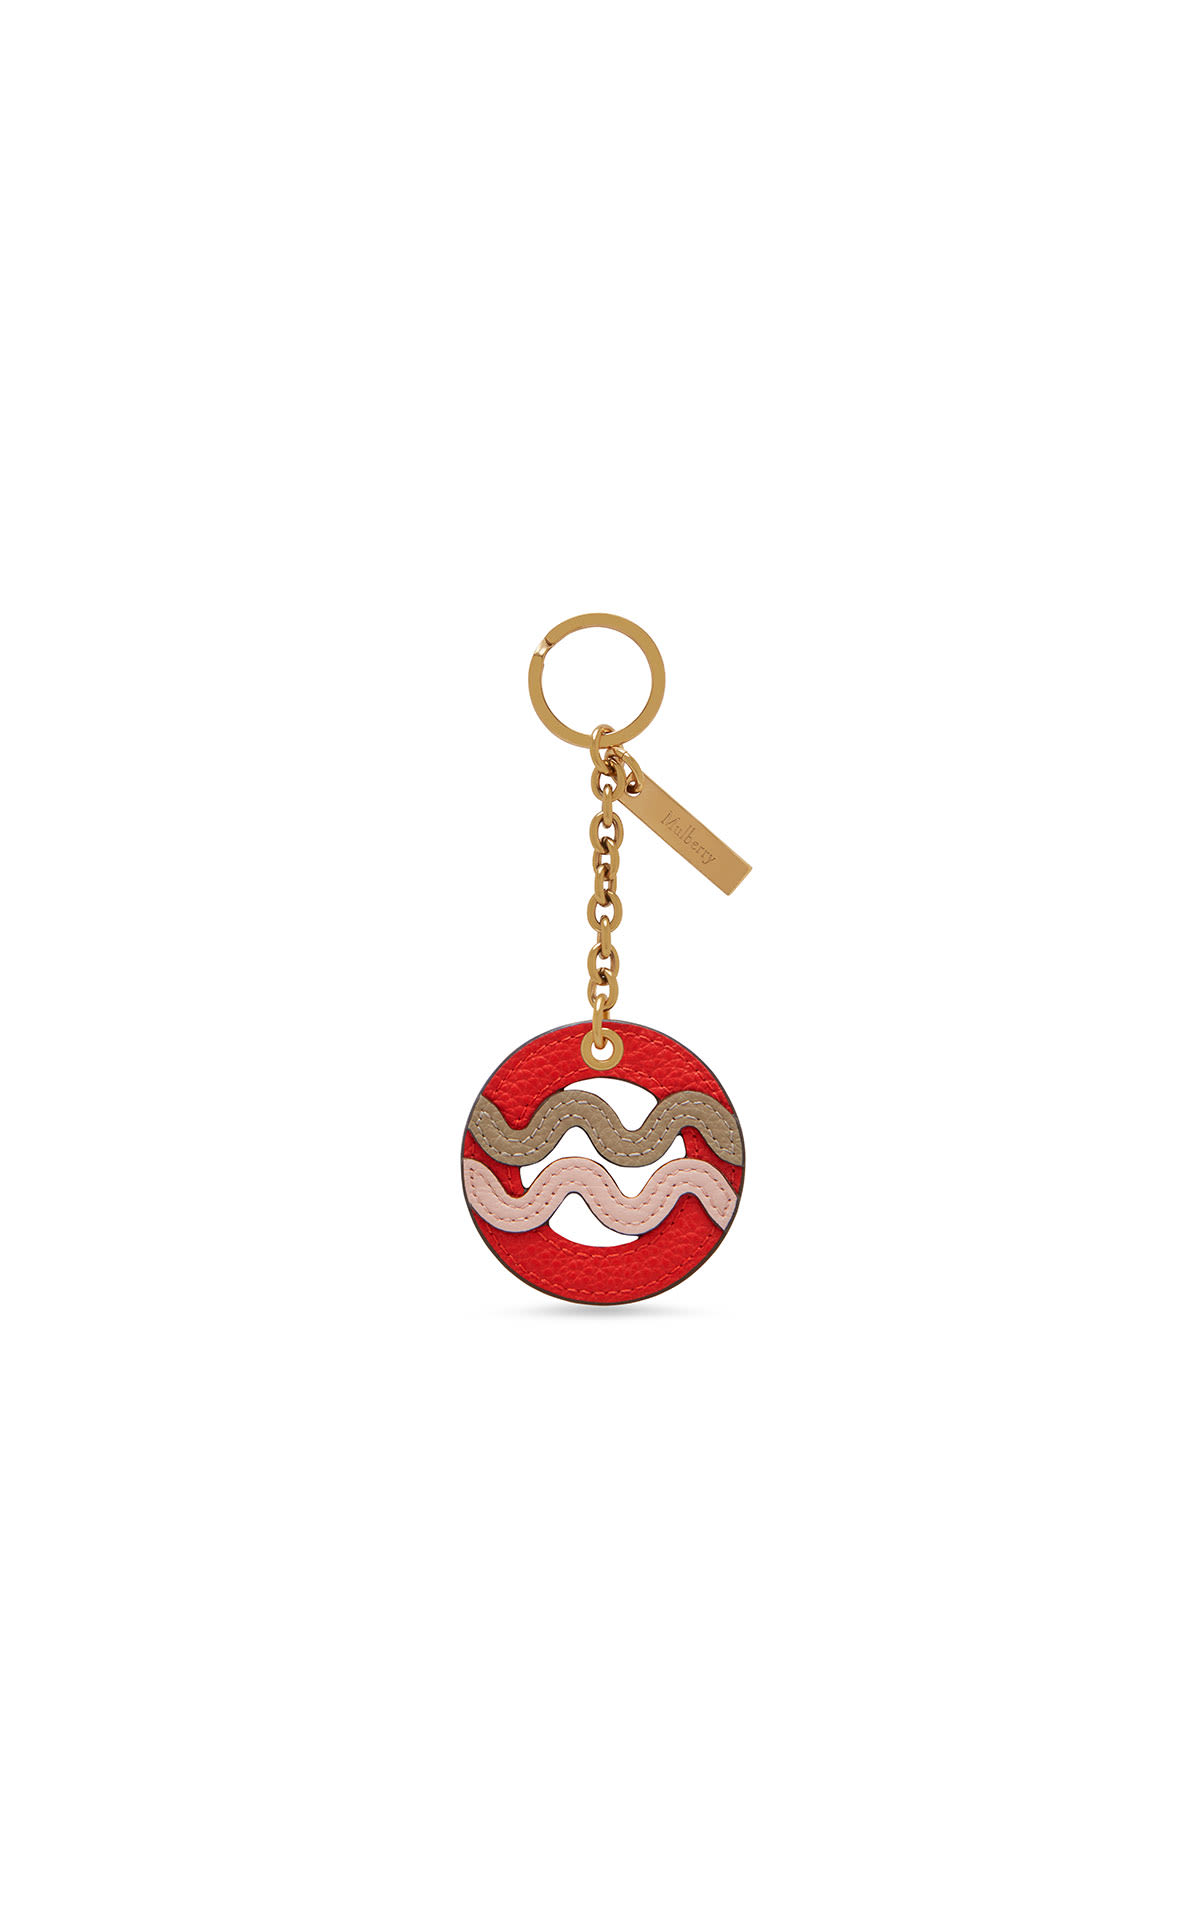 Mulberry Zodiac keyring - aquarius from Bicester Village